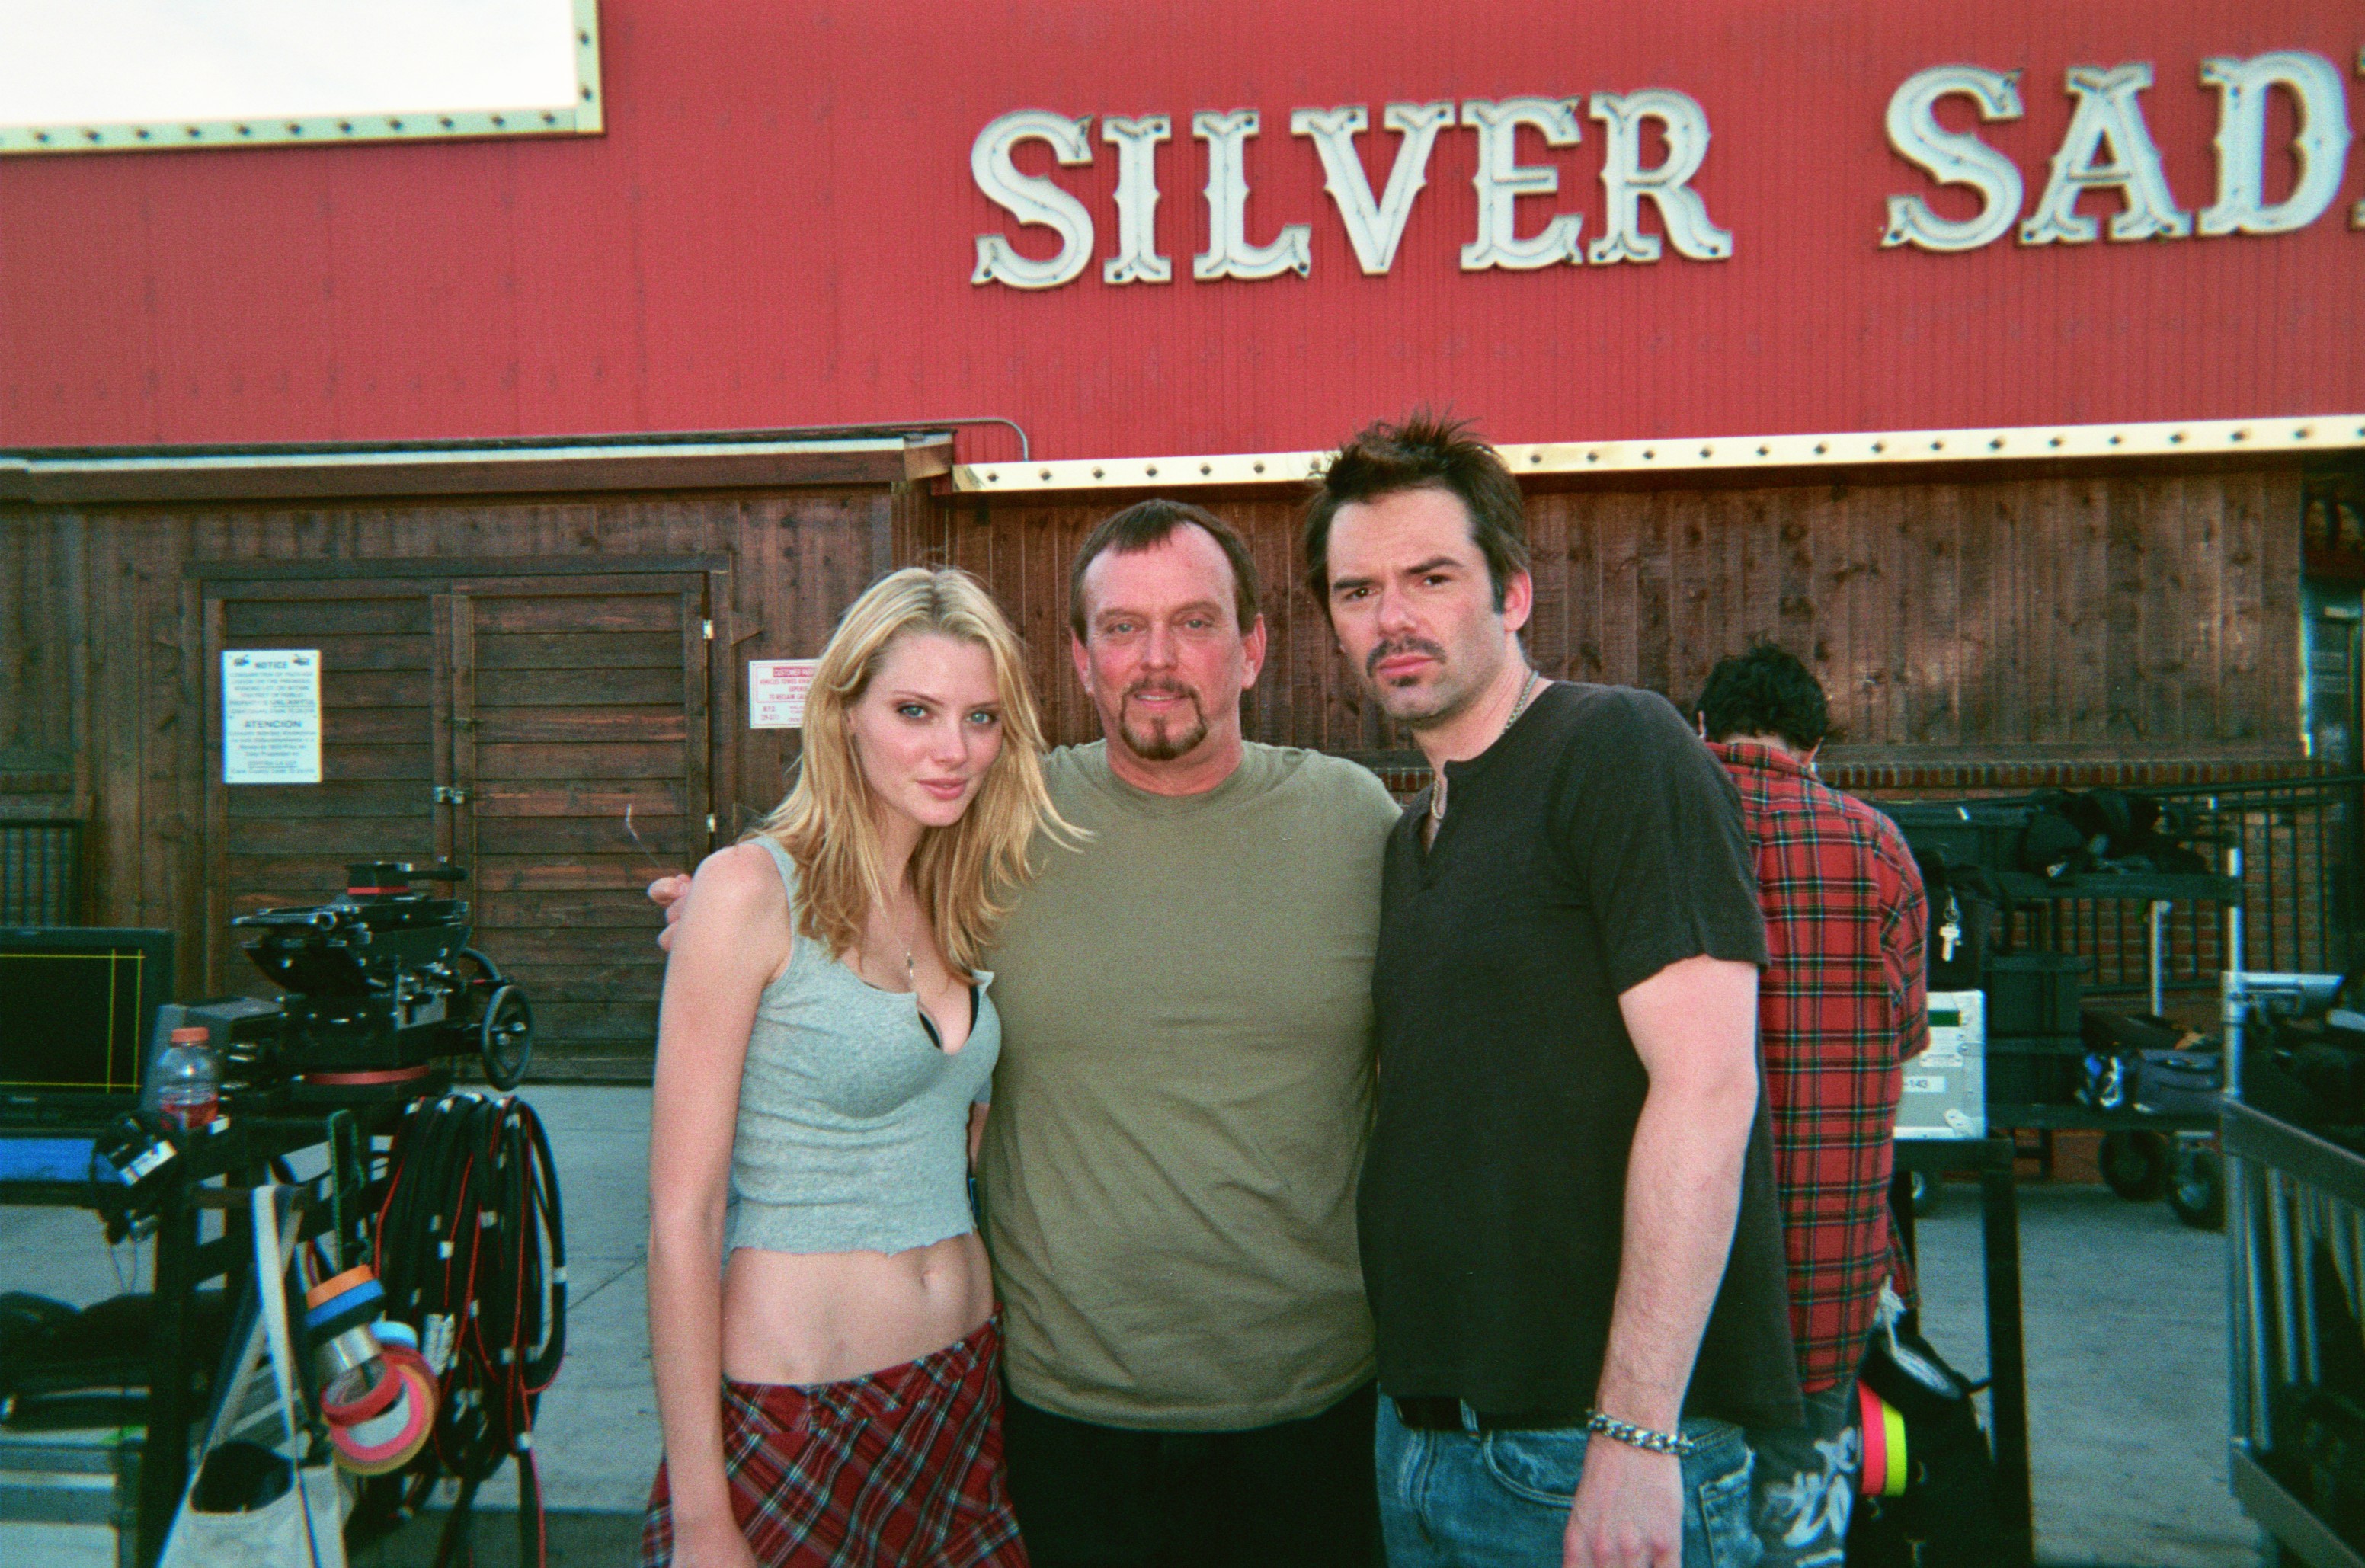 Actors April Bowlby (best known for her role on Two and a Half Men as Jon Cryer's ditzy girlfriend Kandi), Anthony Hornus (An Ordinary Killer, Wicked Spring, Ghost Town) and Billy Burke (Fracture) on the Las Vegas set of Mikey and Delores.